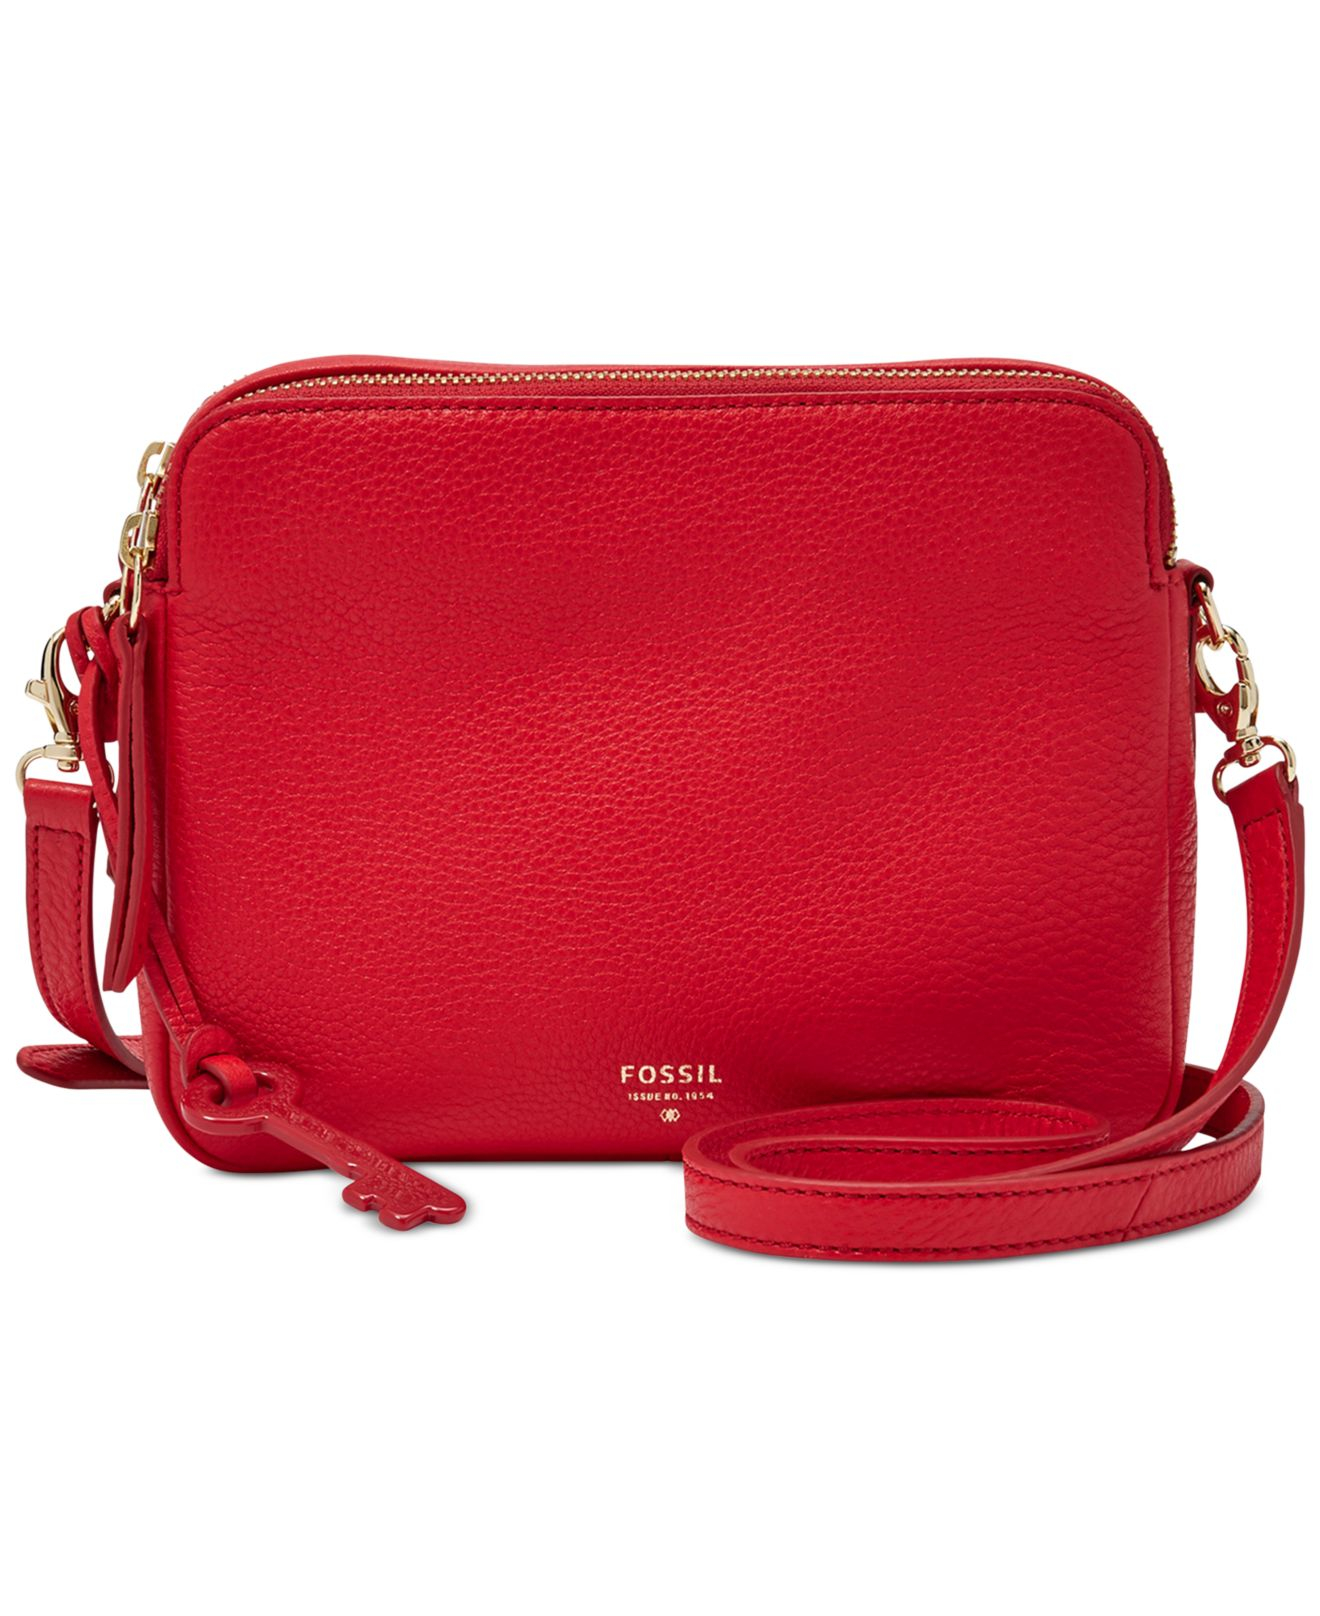 Fossil Sydney Leather Crossbody in Red | Lyst